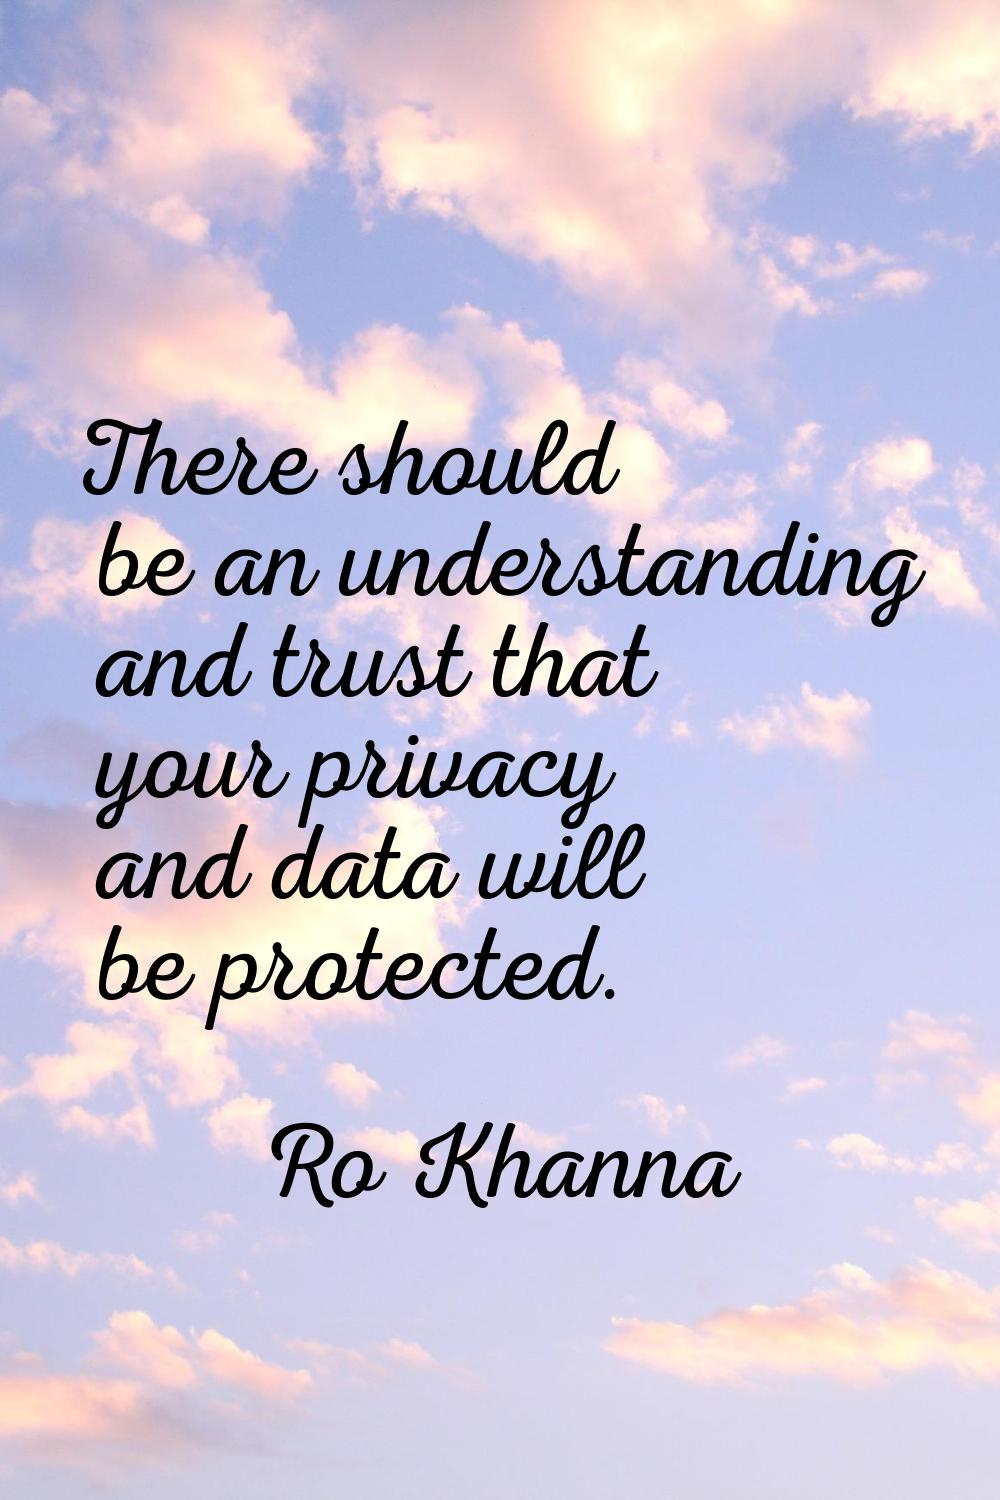 There should be an understanding and trust that your privacy and data will be protected.